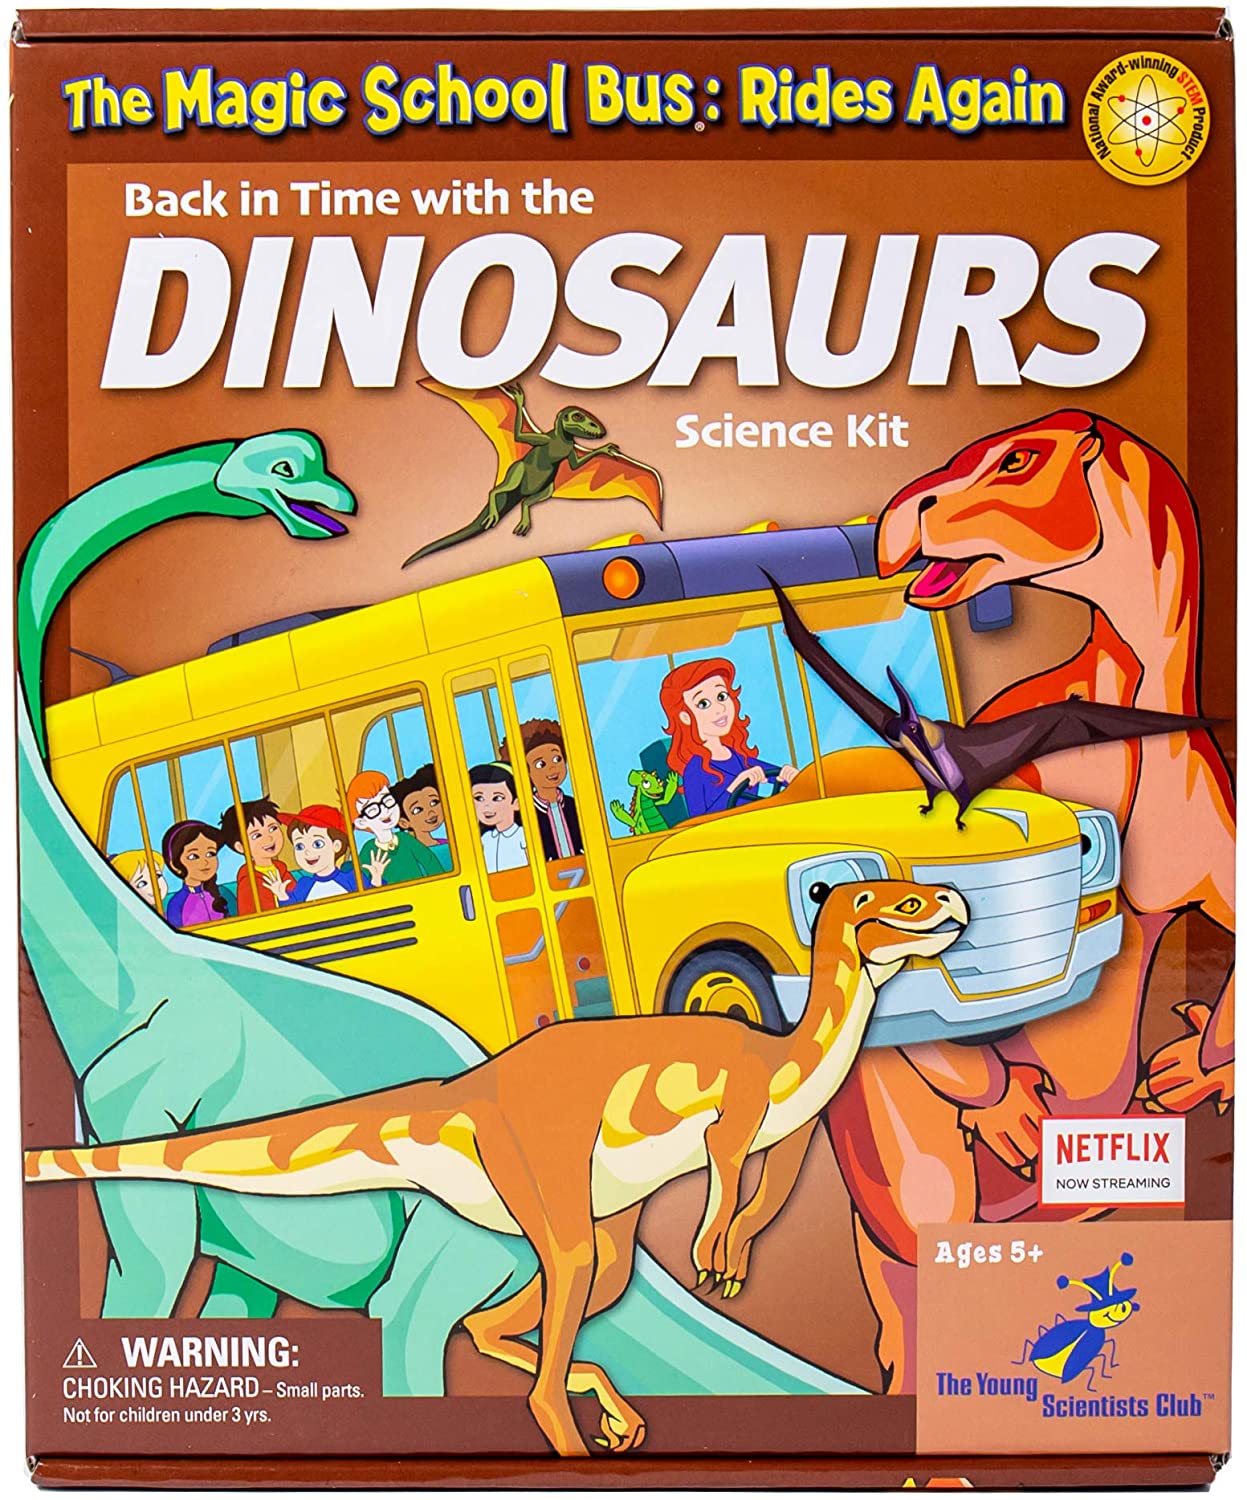 Back in Time with the Dinosaurs Science Kit